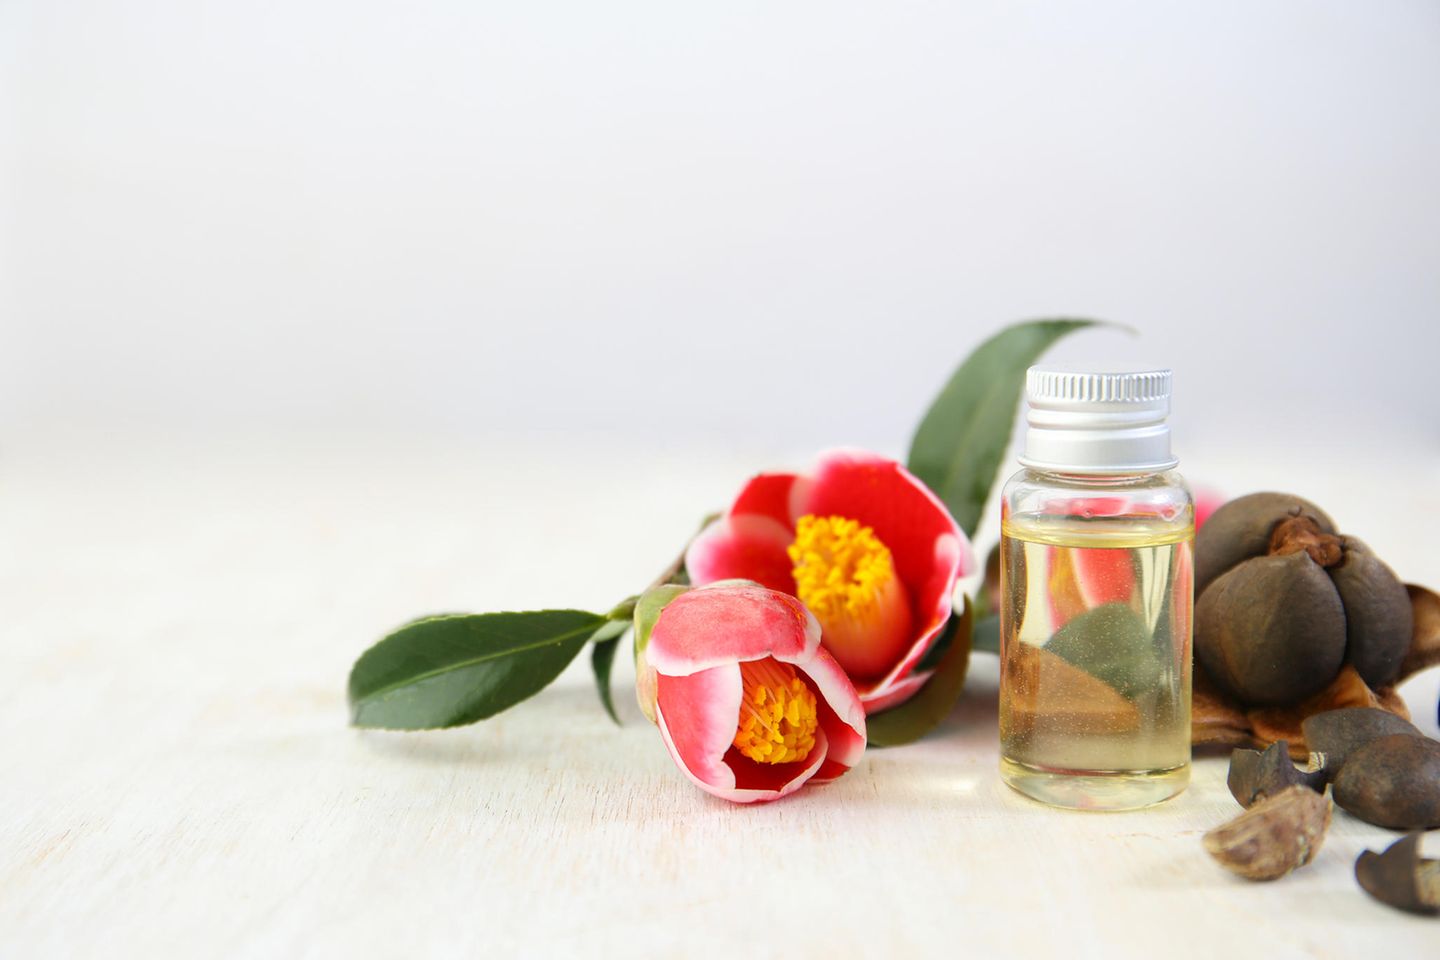 Camellia Oil: Flowers, seeds and oil of camellia